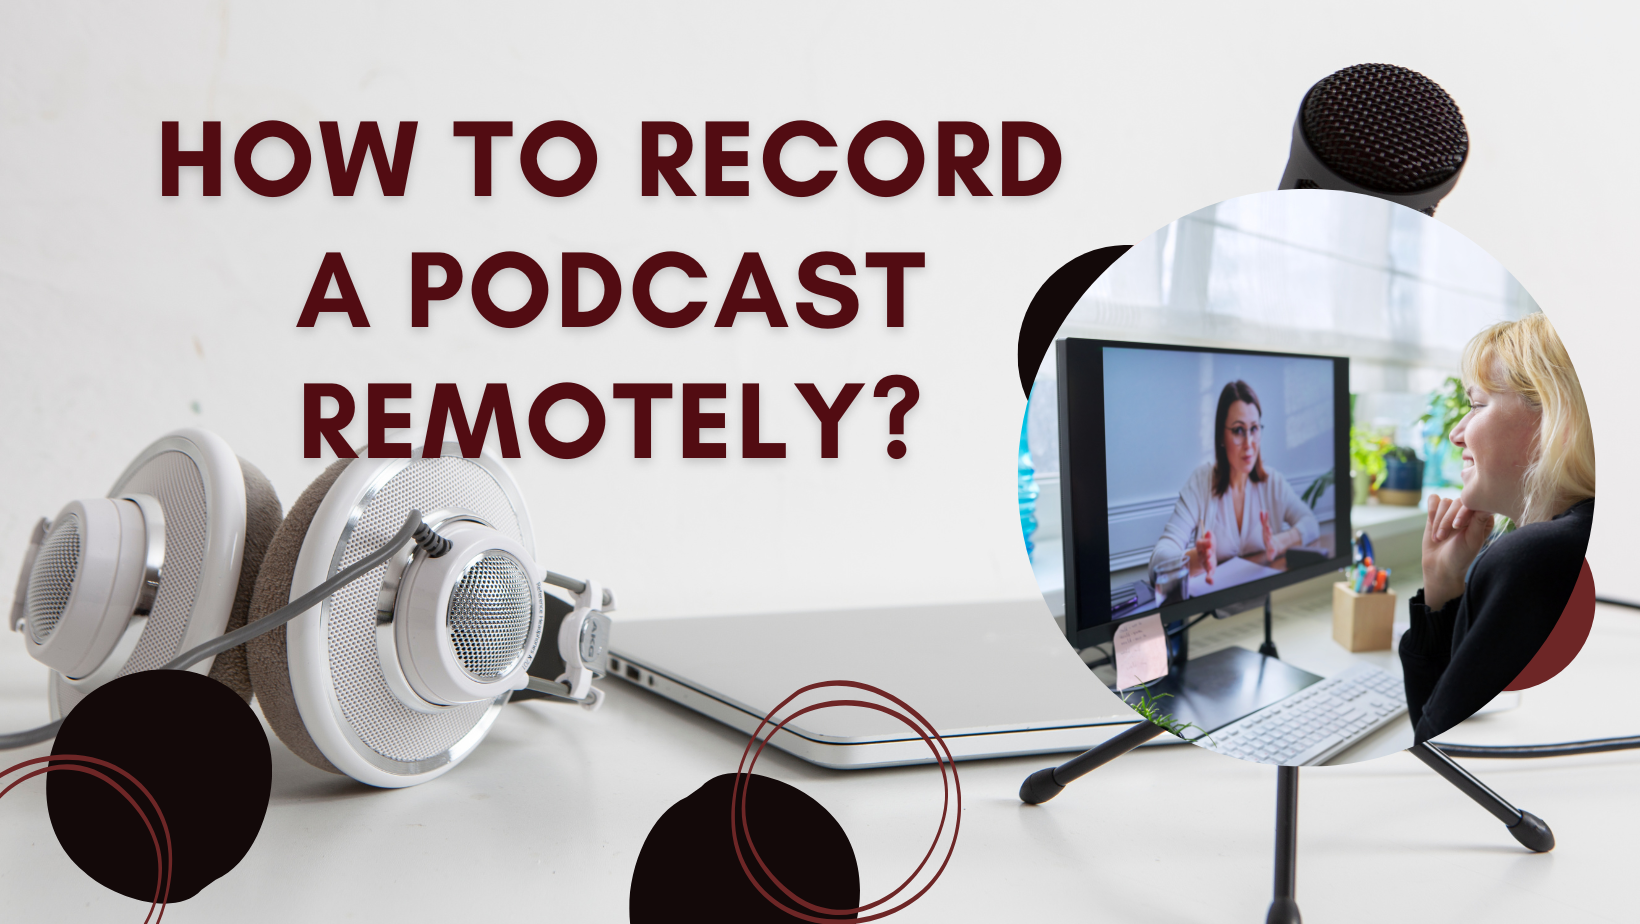 How to Record a Podcast Remotely?